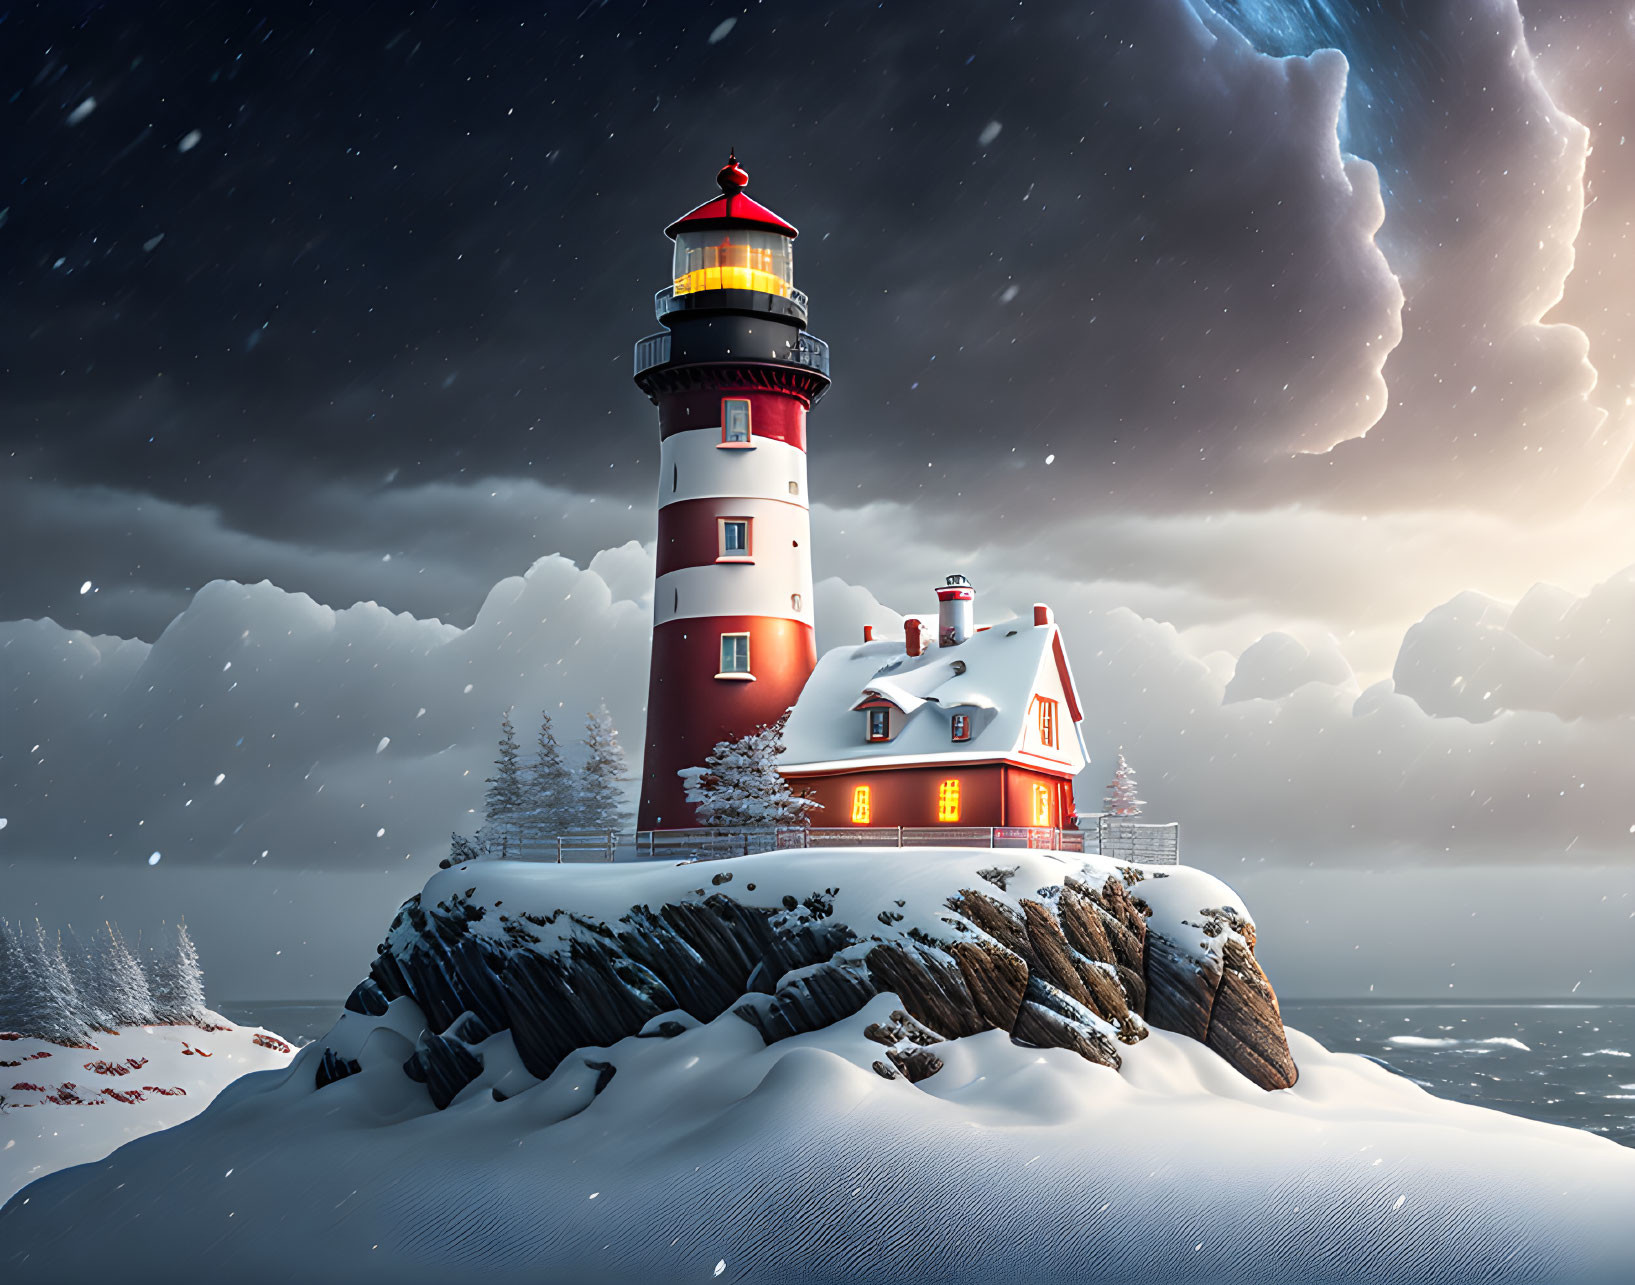 Snowy Cliff Lighthouse: Red and White Structure with Glowing Lights